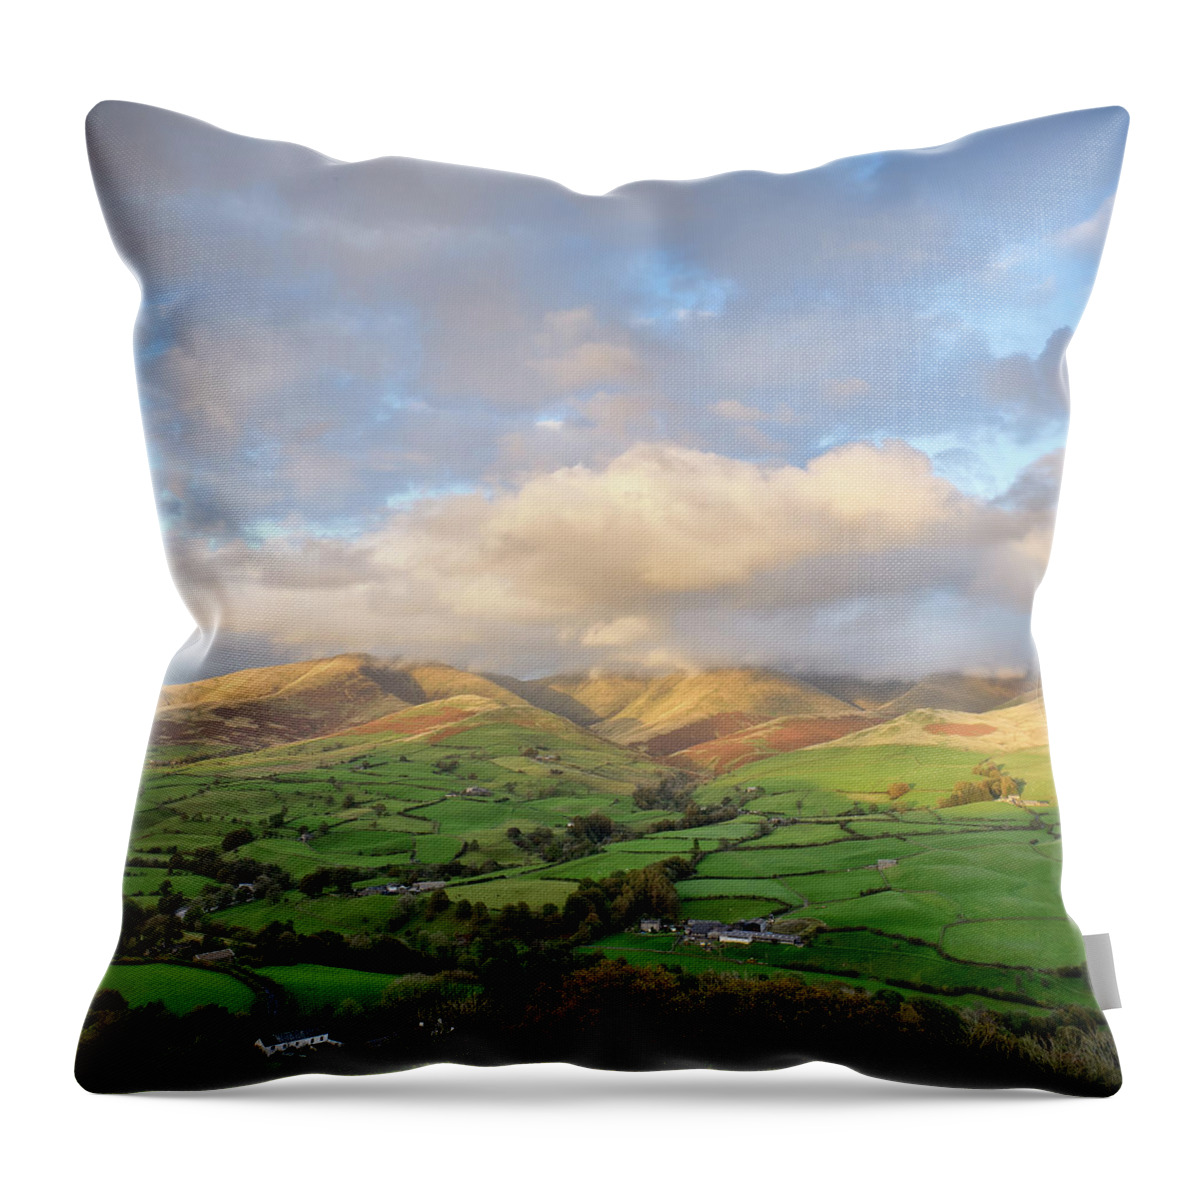 Scenics Throw Pillow featuring the photograph Lune Valley And Howgill Fells by David Barrett